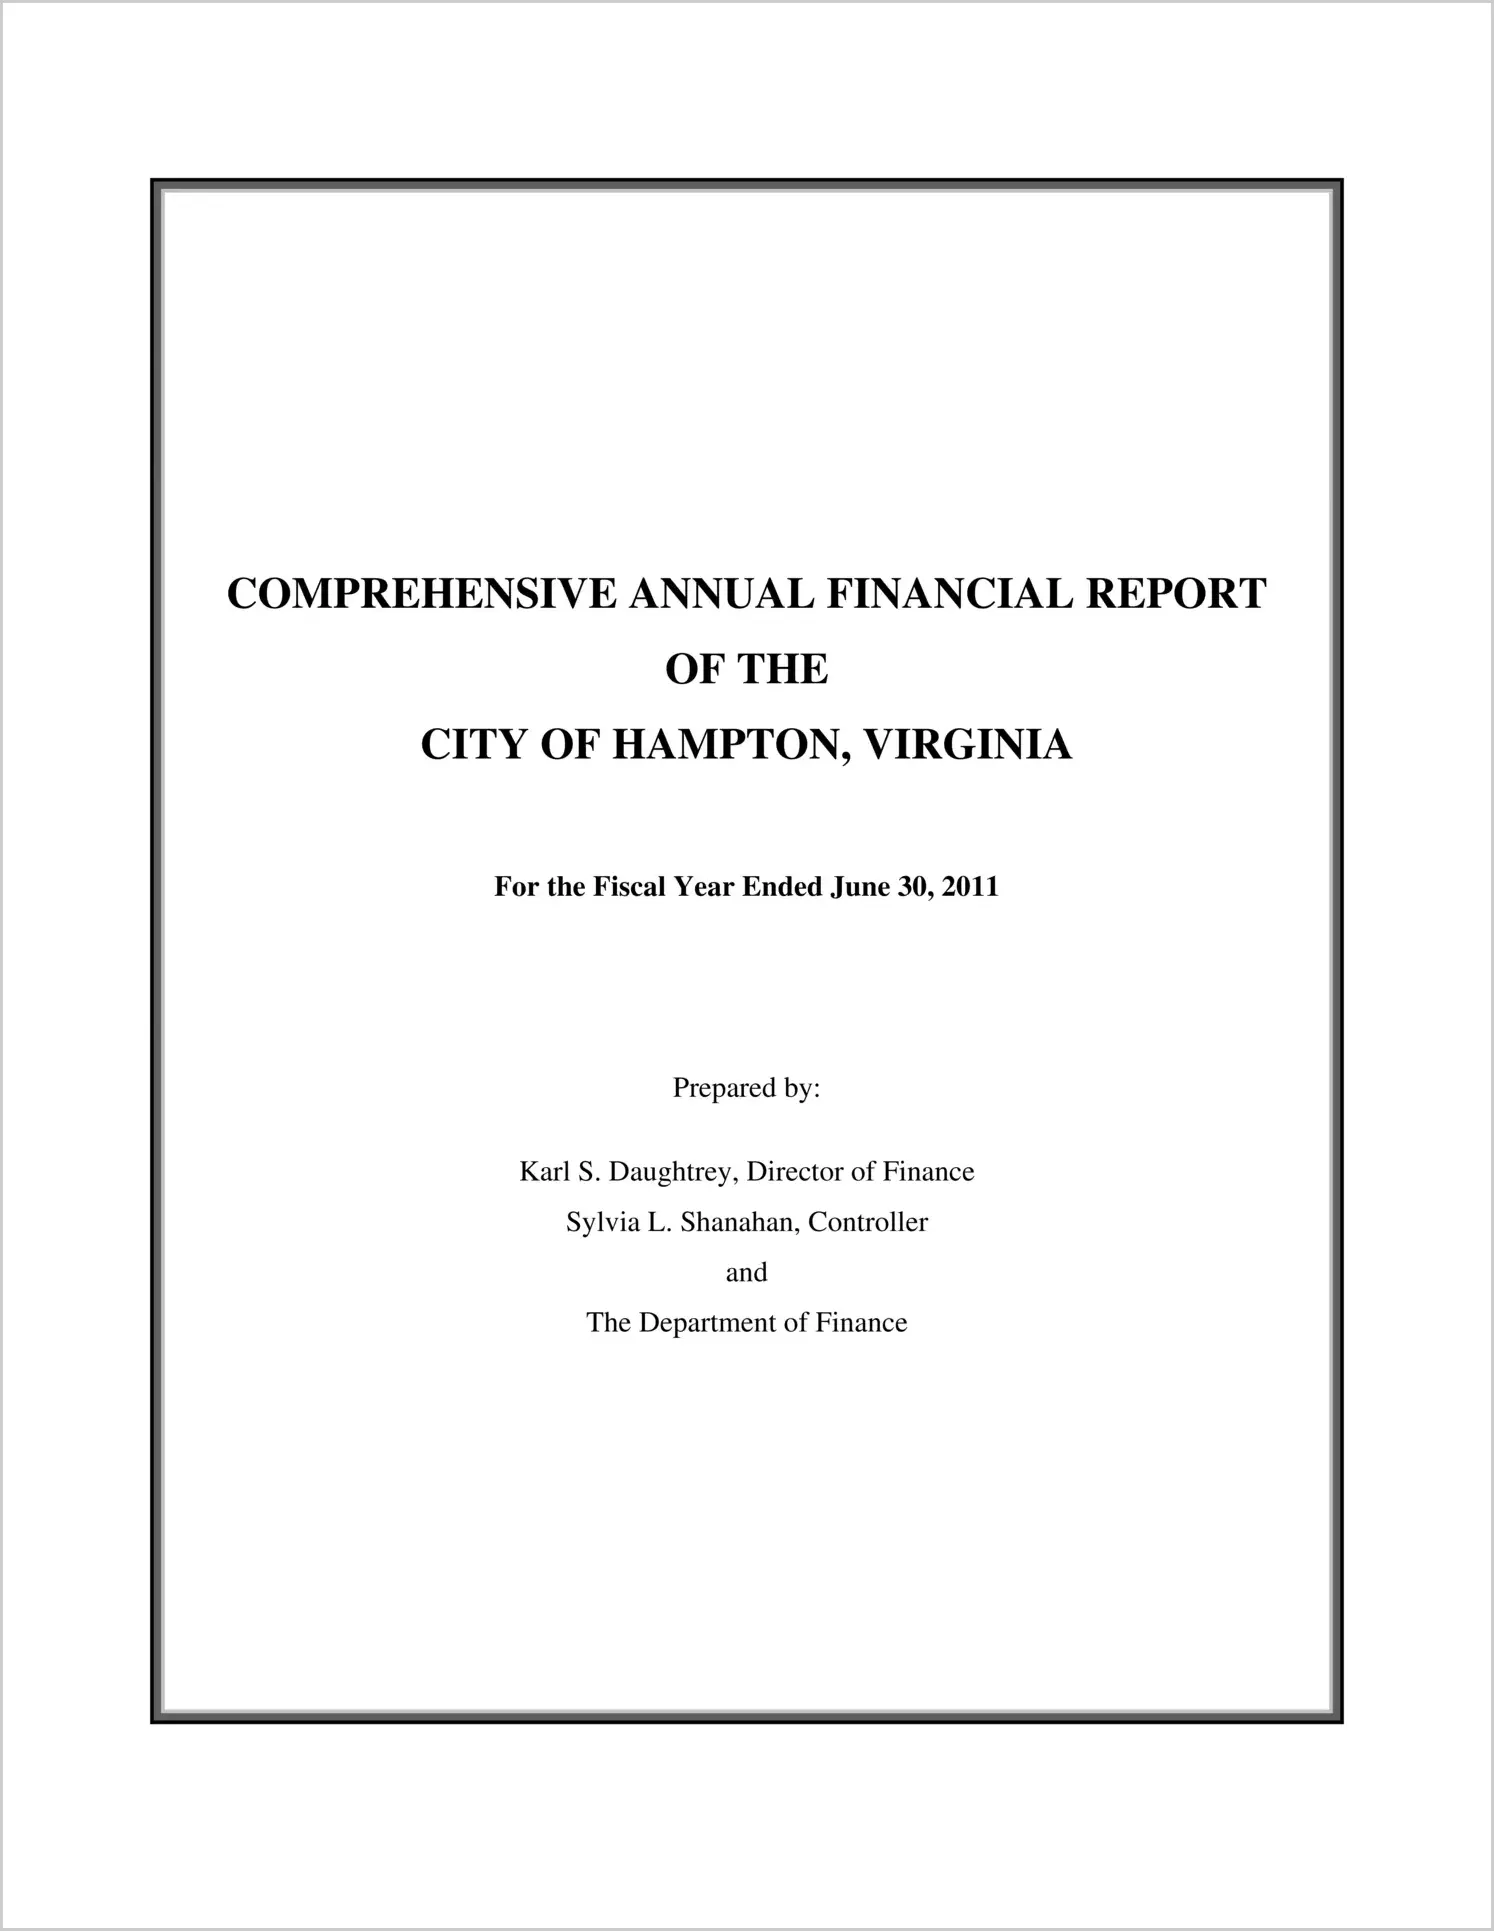 2011 Annual Financial Report for City of Hampton